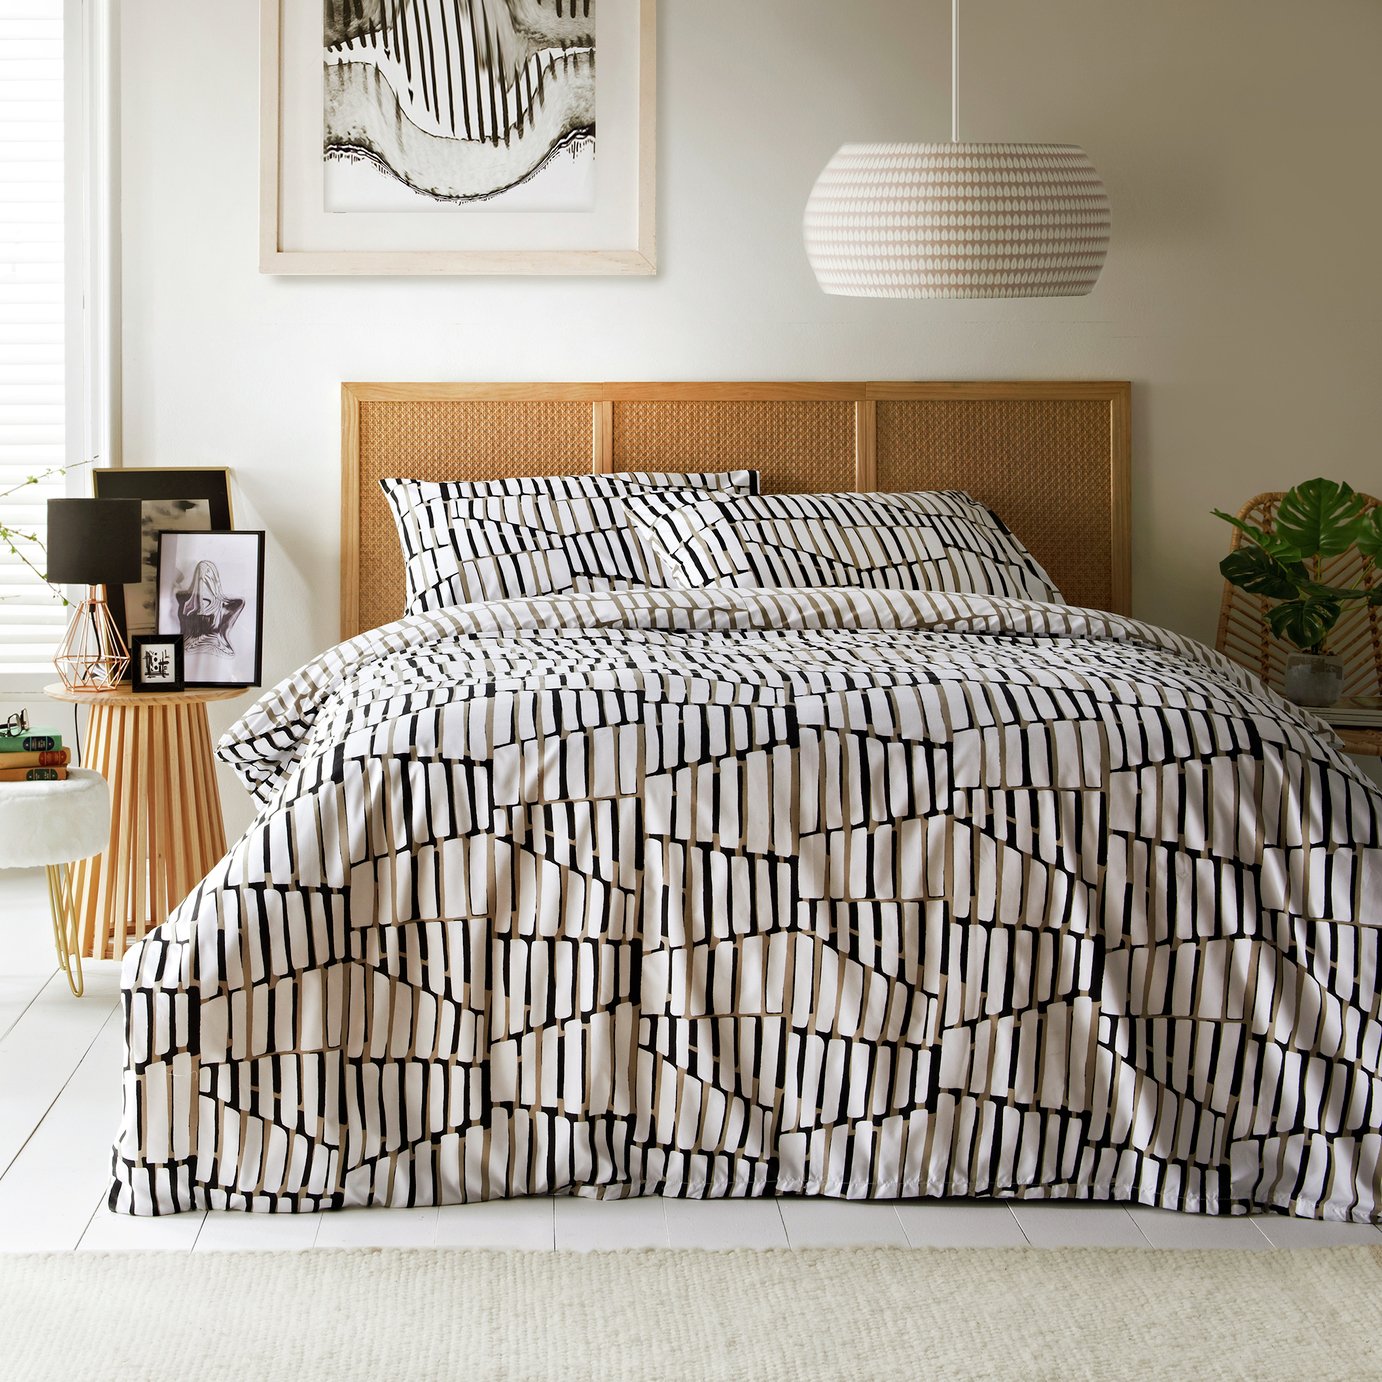 Cosmo Living Geo Printed Natural Bedding Set - Double 